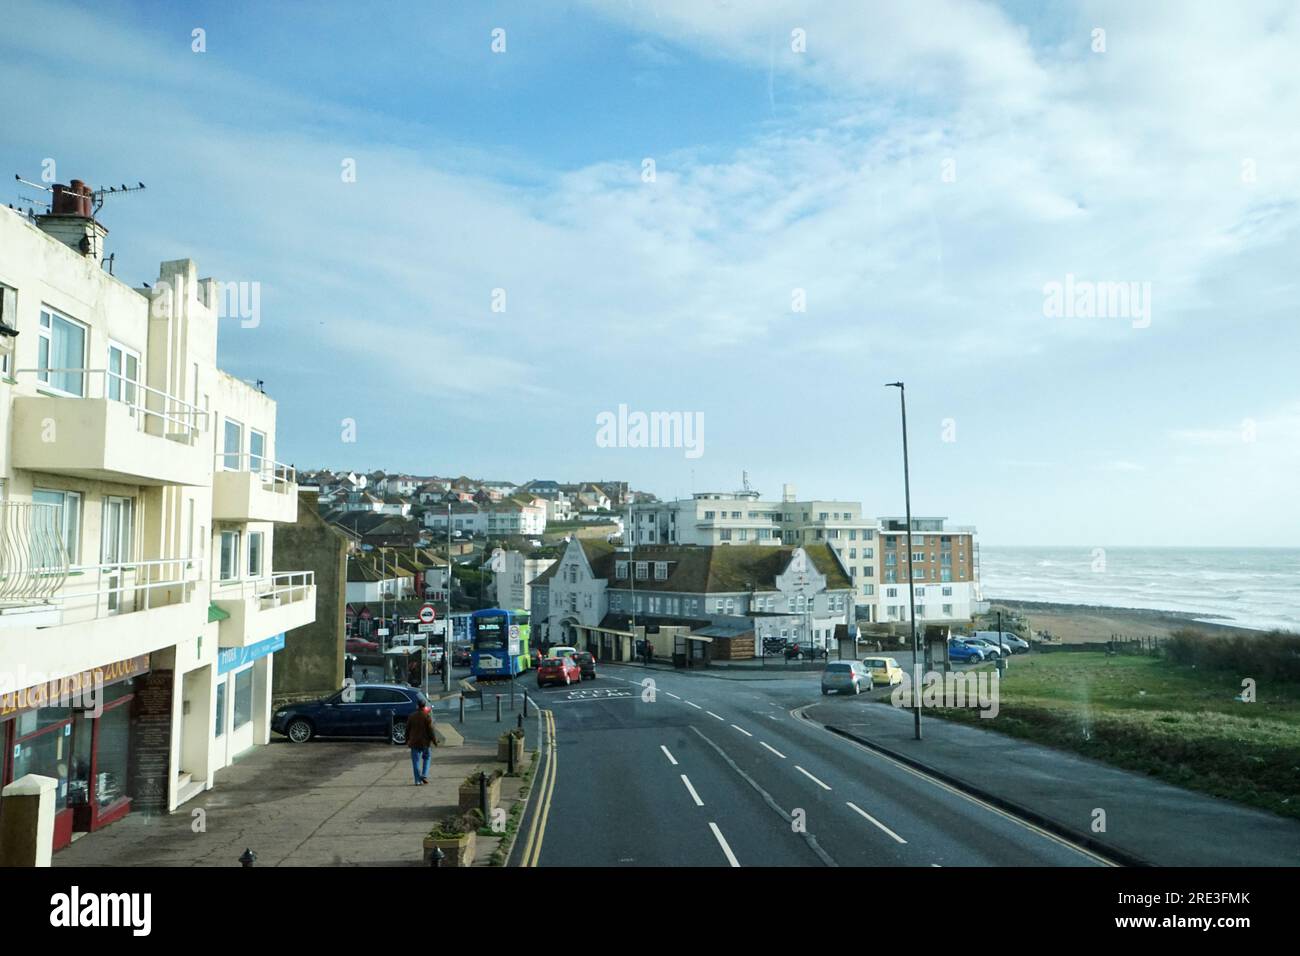 Exterior European architecture and urban building design of Brighton pier street and town with cloudy blue sky view- England, United Kingdom Stock Photo